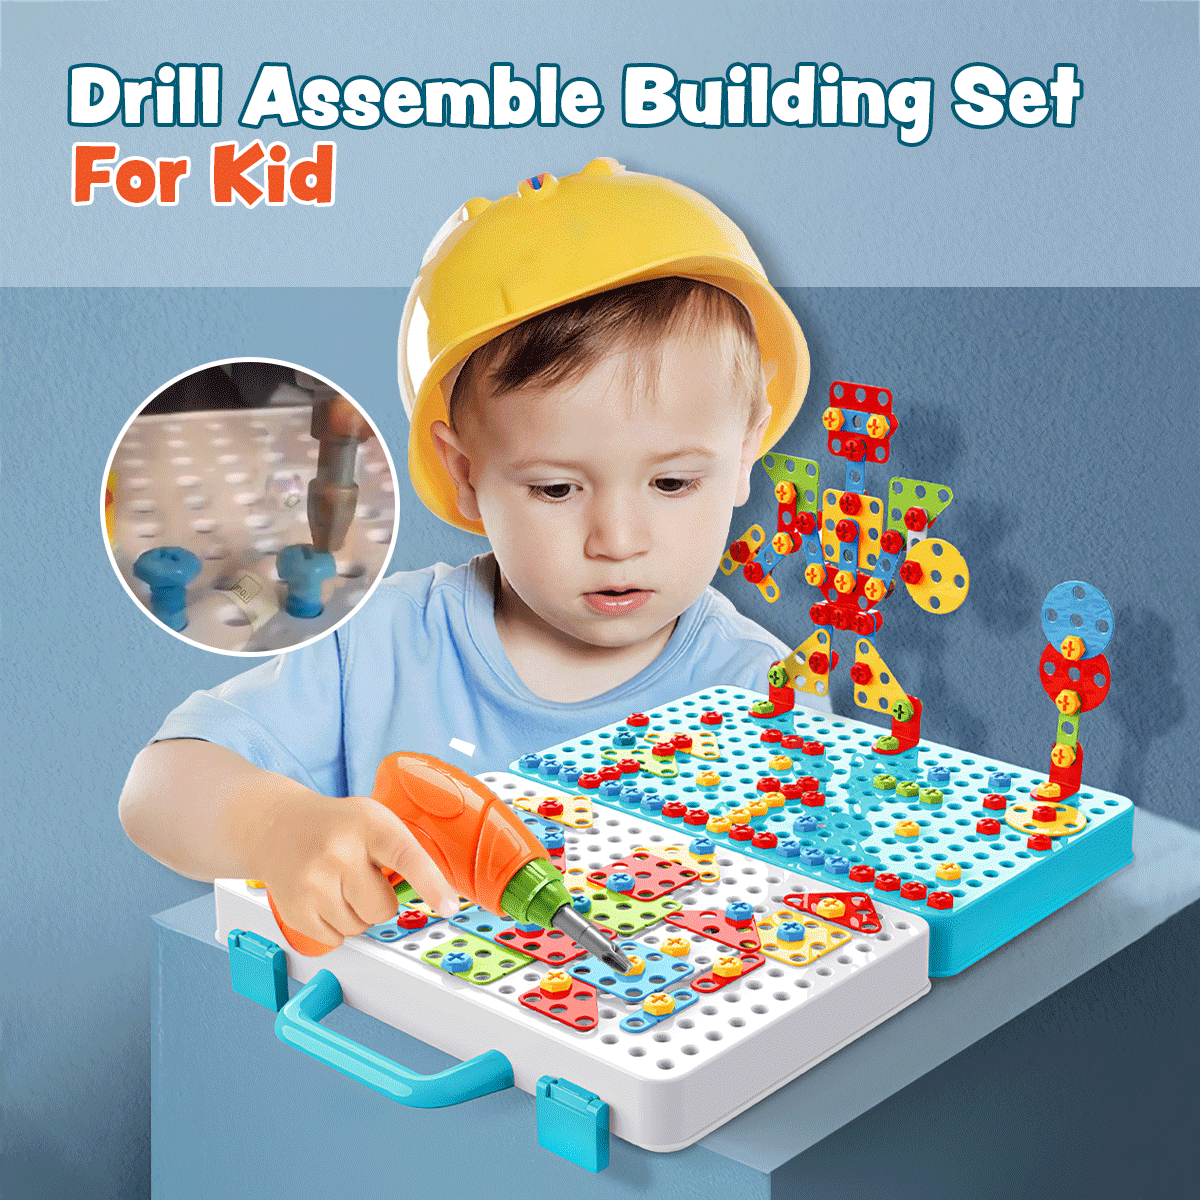 Drill Assemble Building Set For Kid